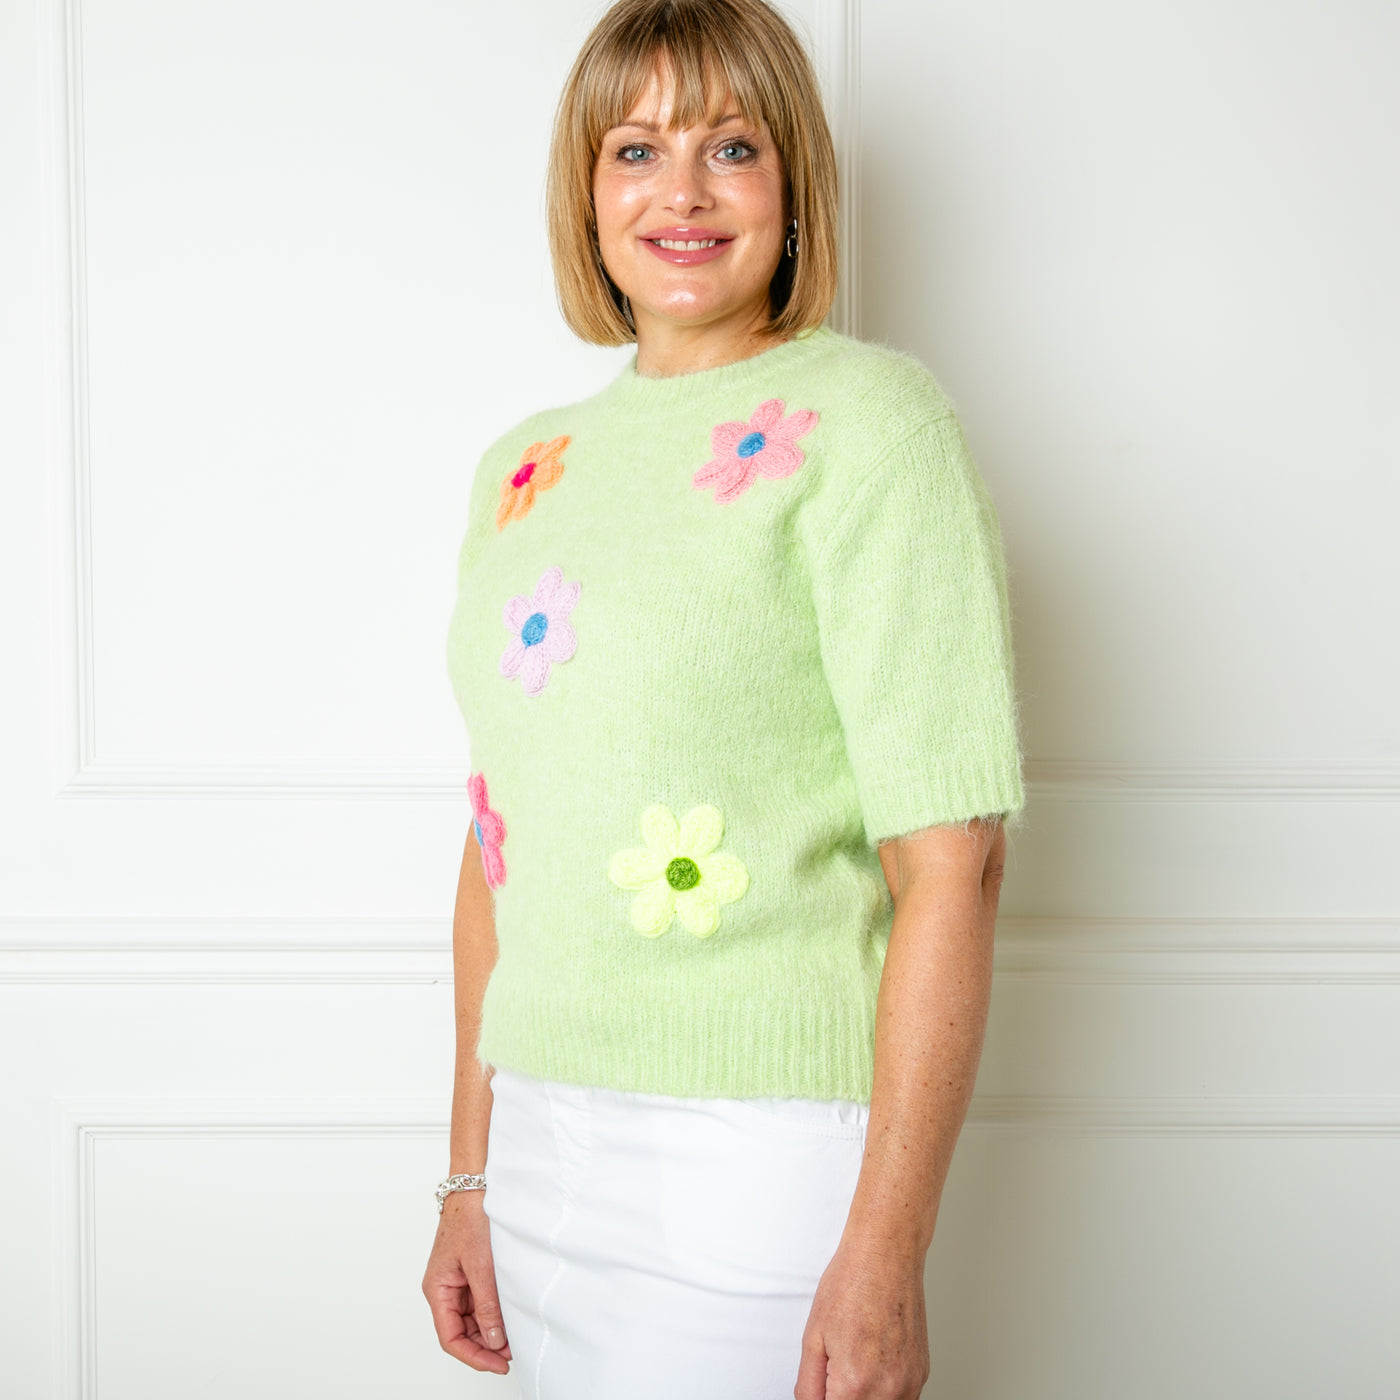 The green Short Sleeve Daisy Jumper made from a blend of cotton and acrylic and perfect for spring